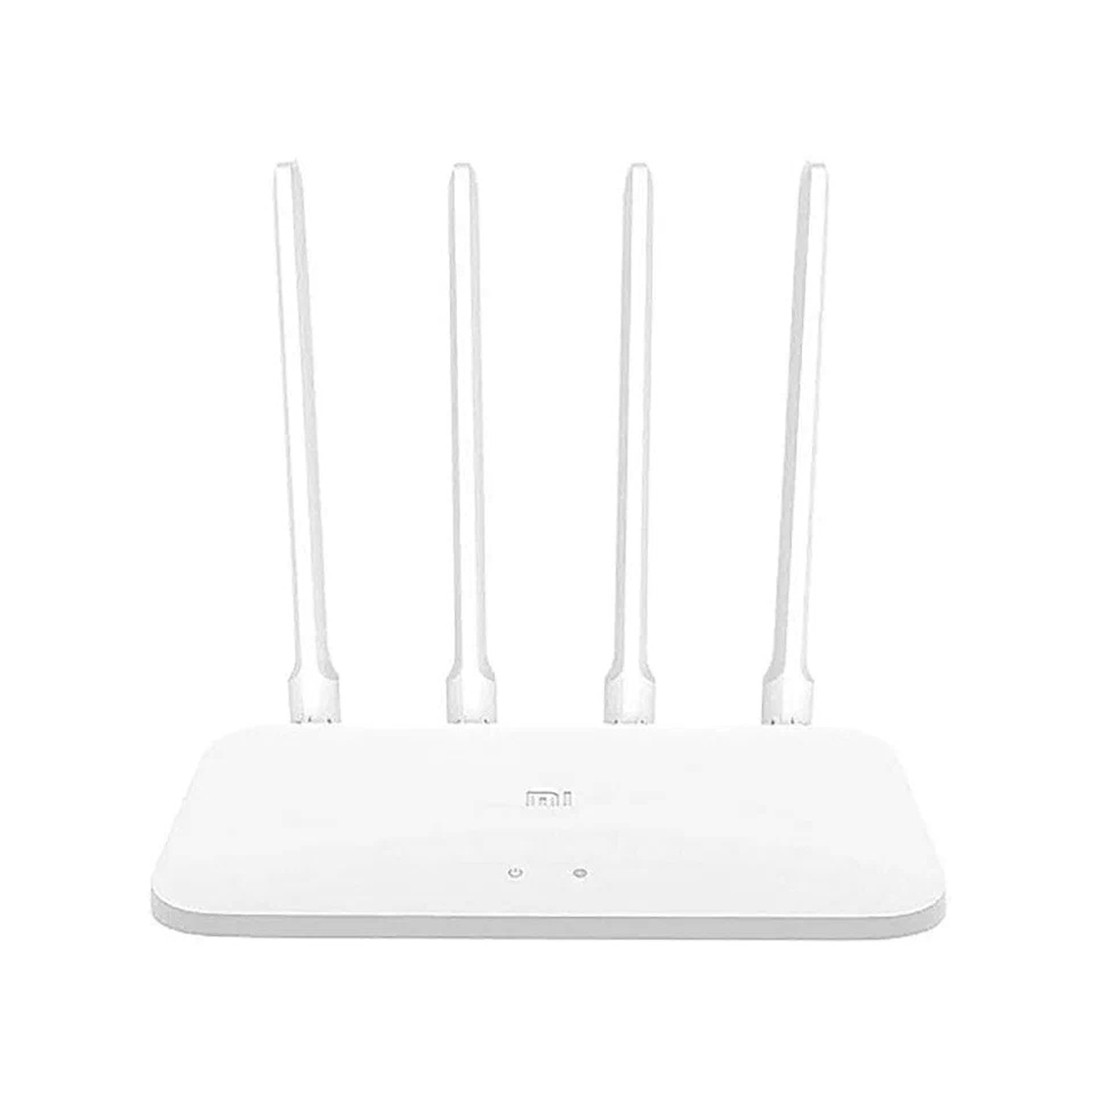 Маршрутизатор Xiaomi Router AC1200 (Маршрутизаторы) - фото 2 - id-p115008330